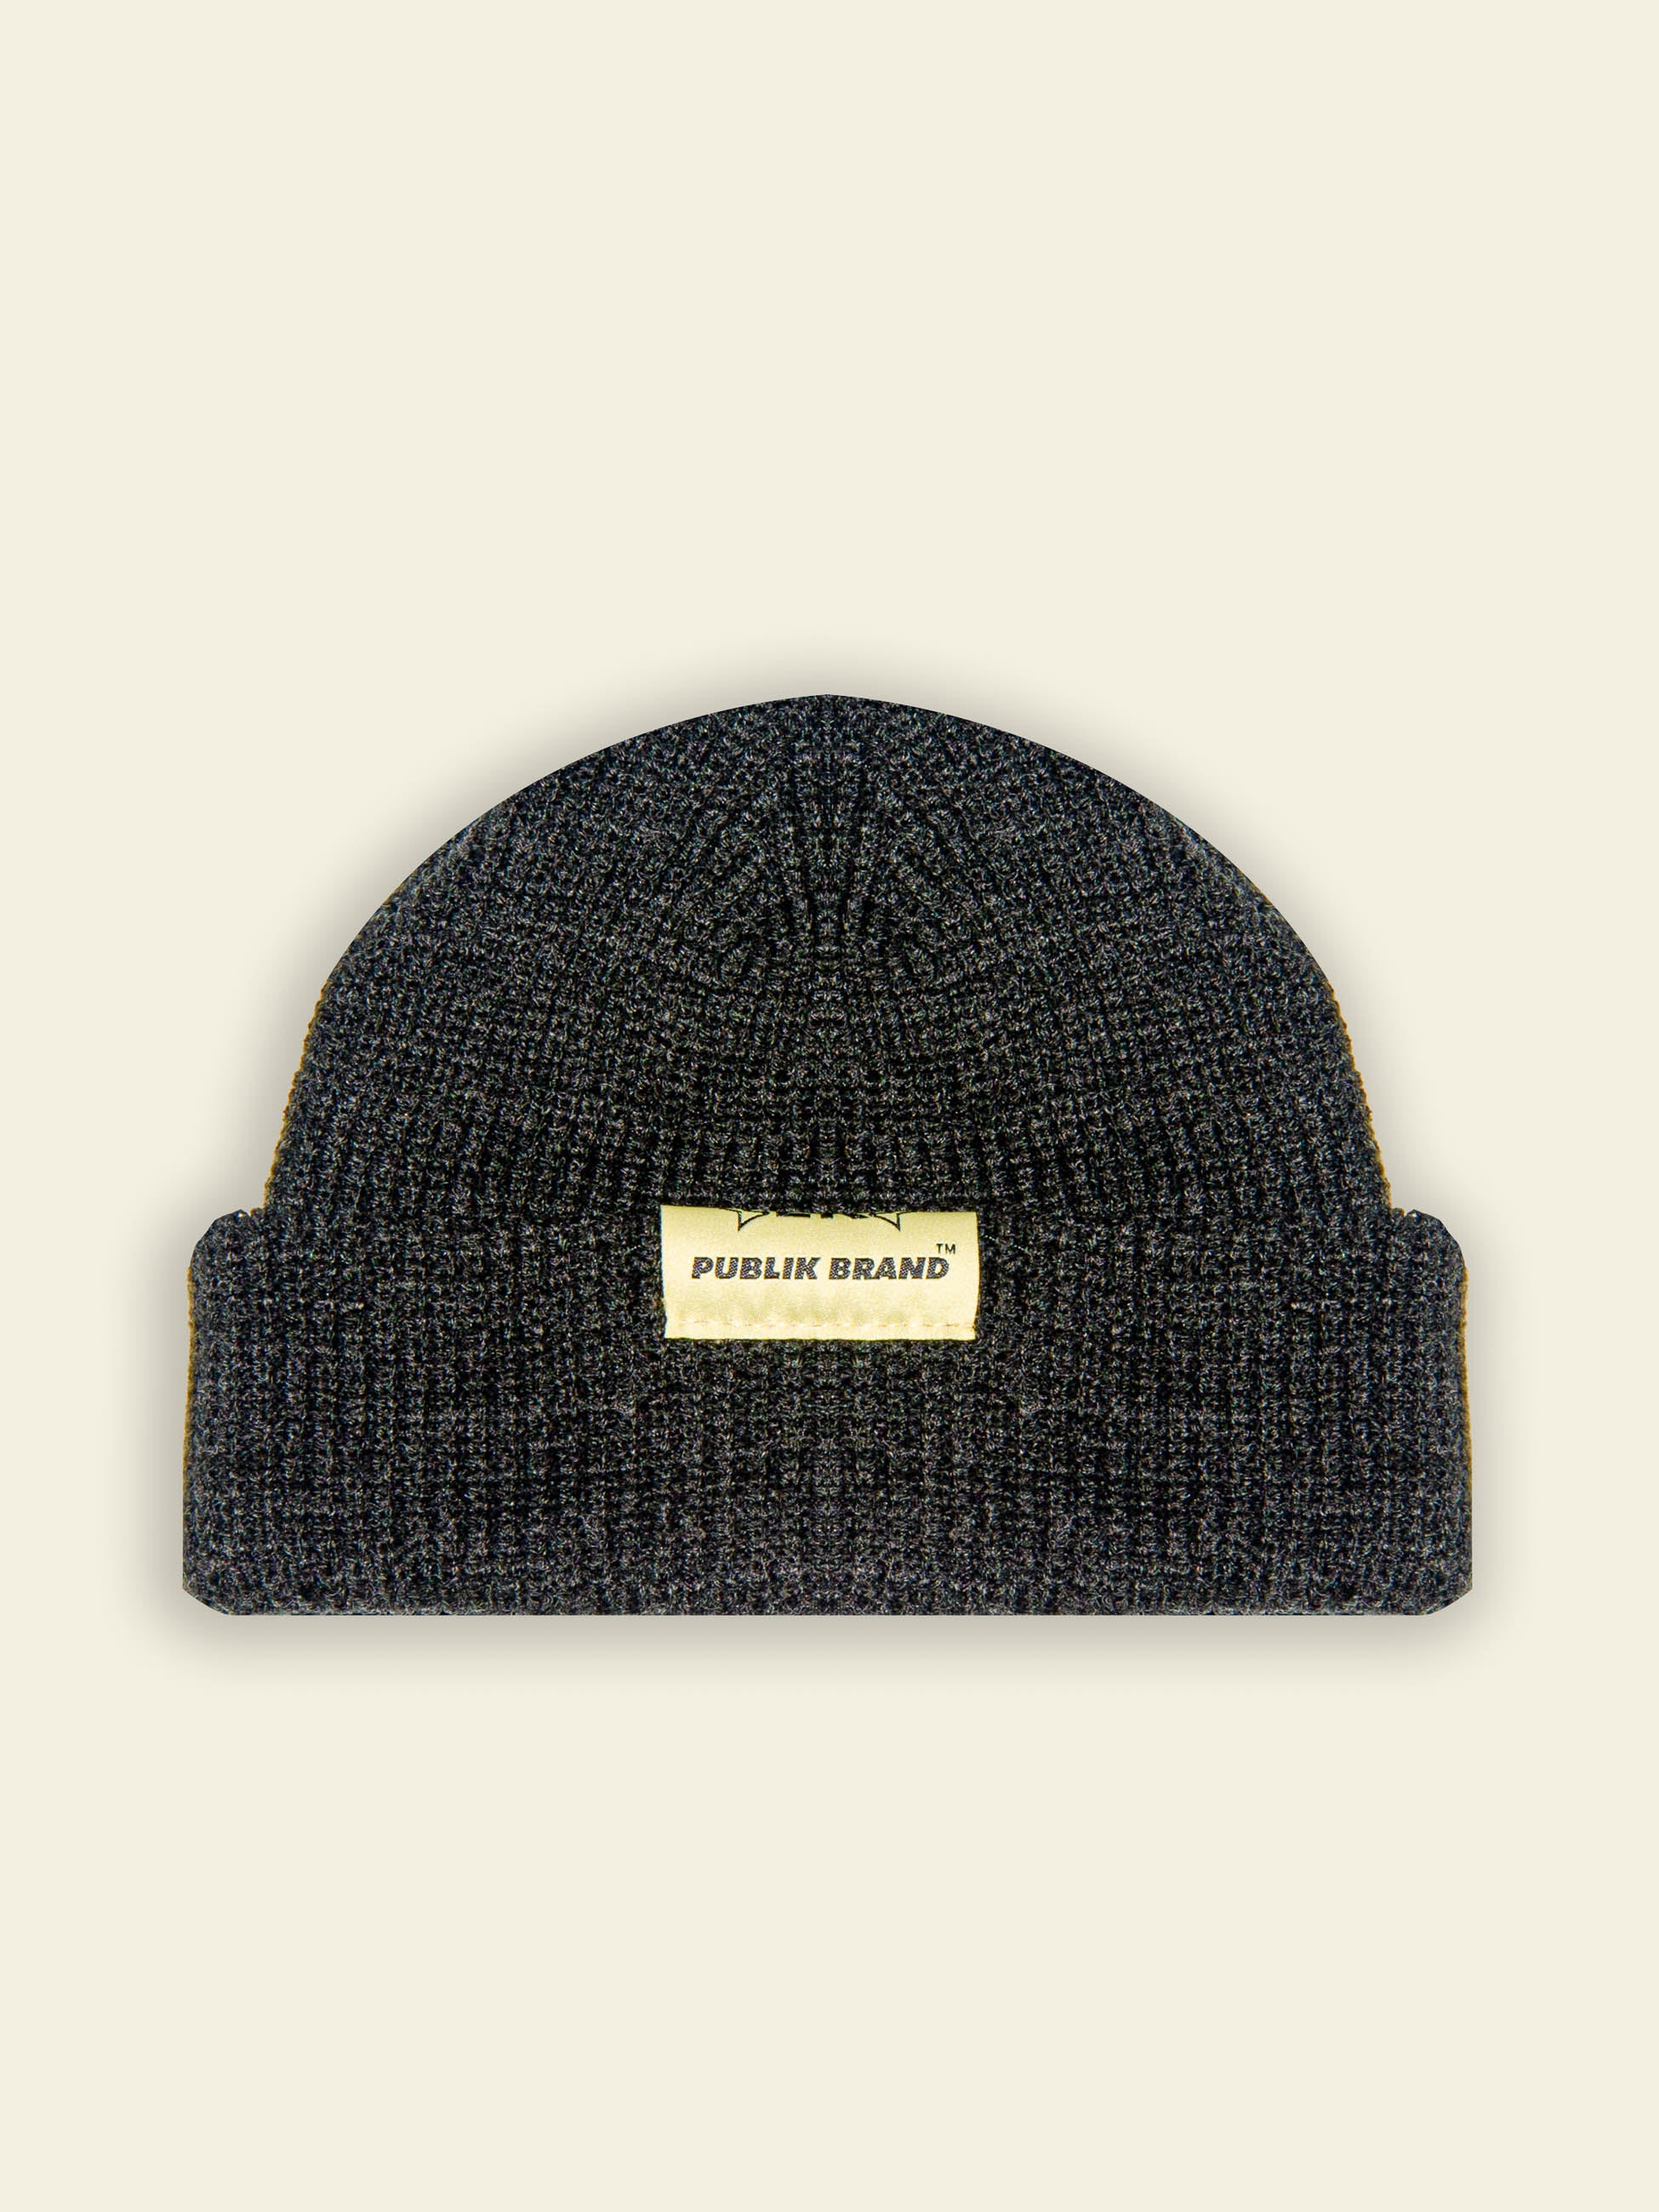 Publik Brand Fisherman Beanie Anchor Gray, all made in USA, Back